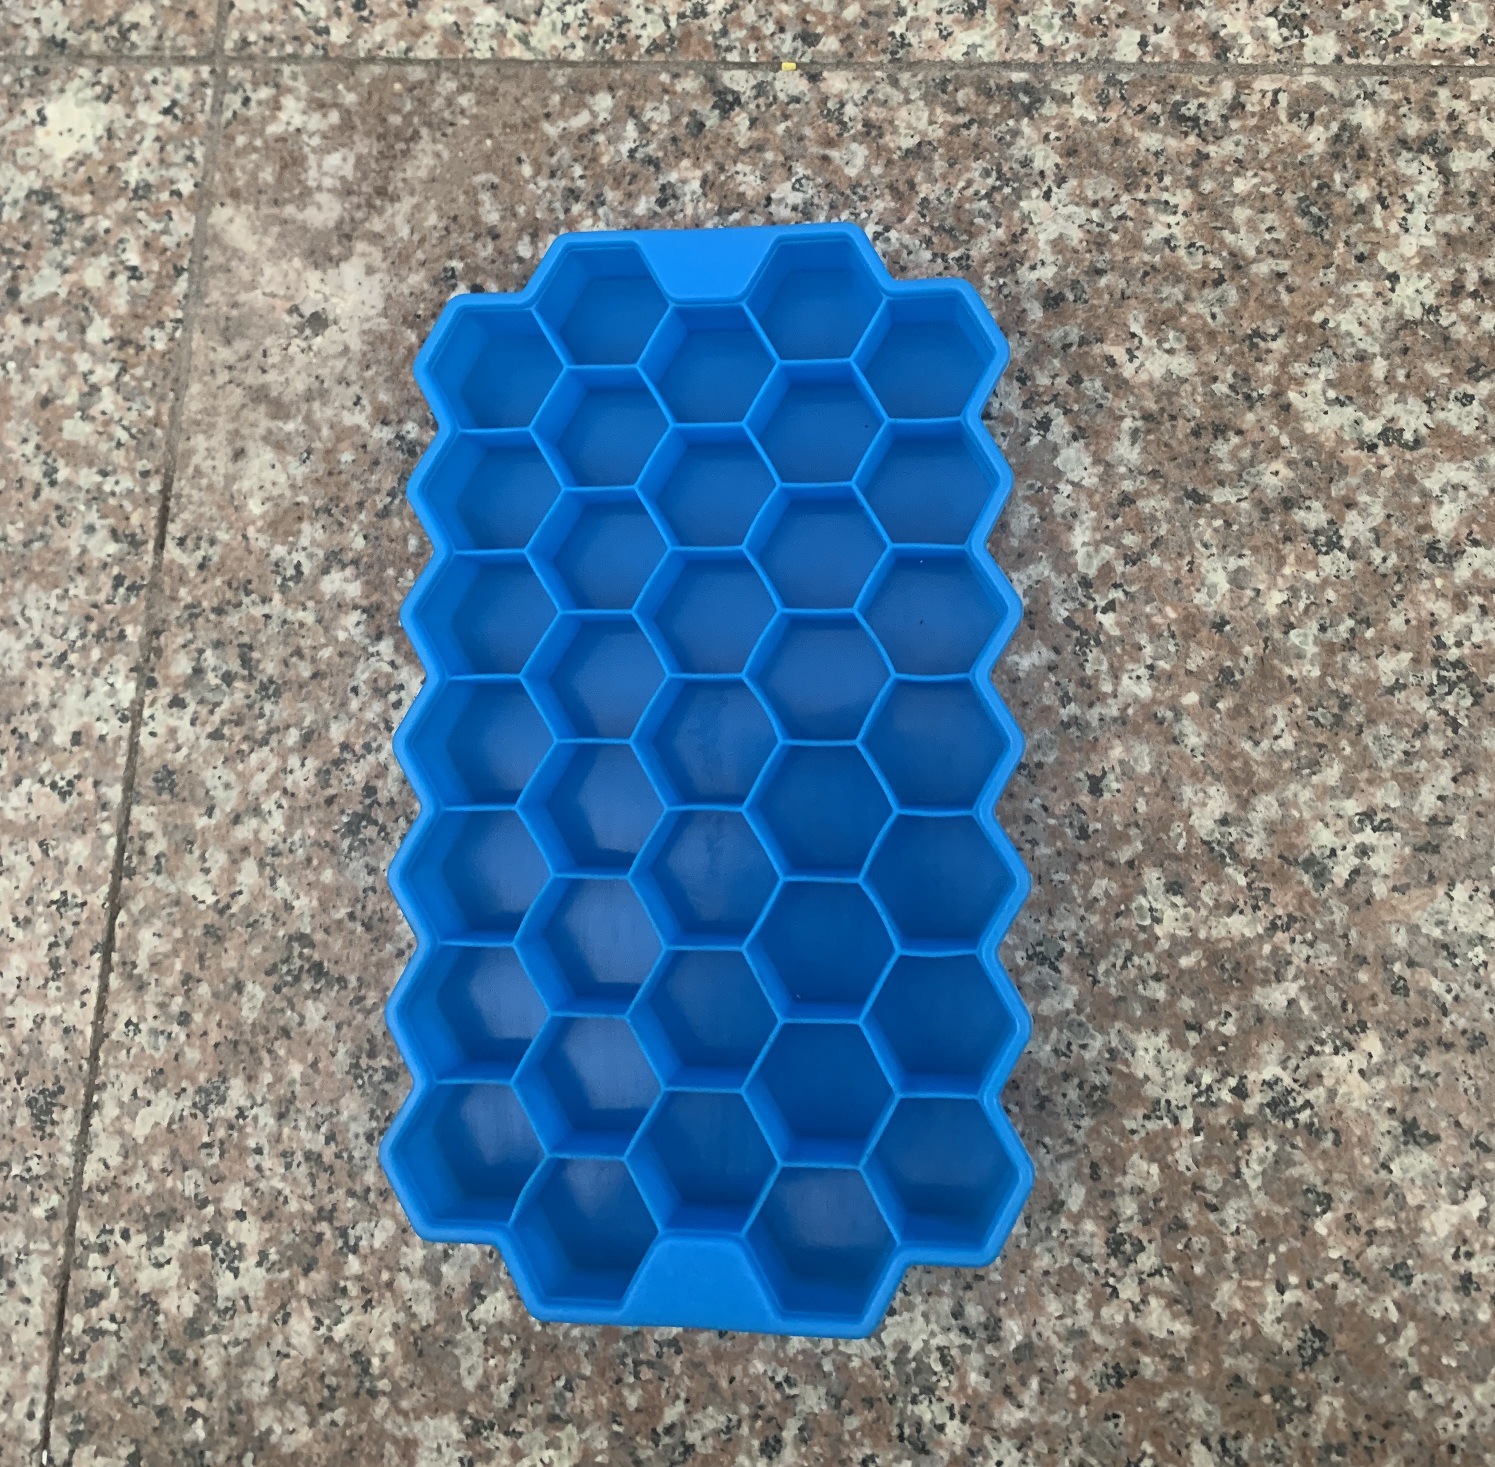 37 Grid Honeycomb Ice Tray Silicone Ice Cube Tray with Lid Ice Tray Diy Ice Mold Ice Cube Mold with Lid